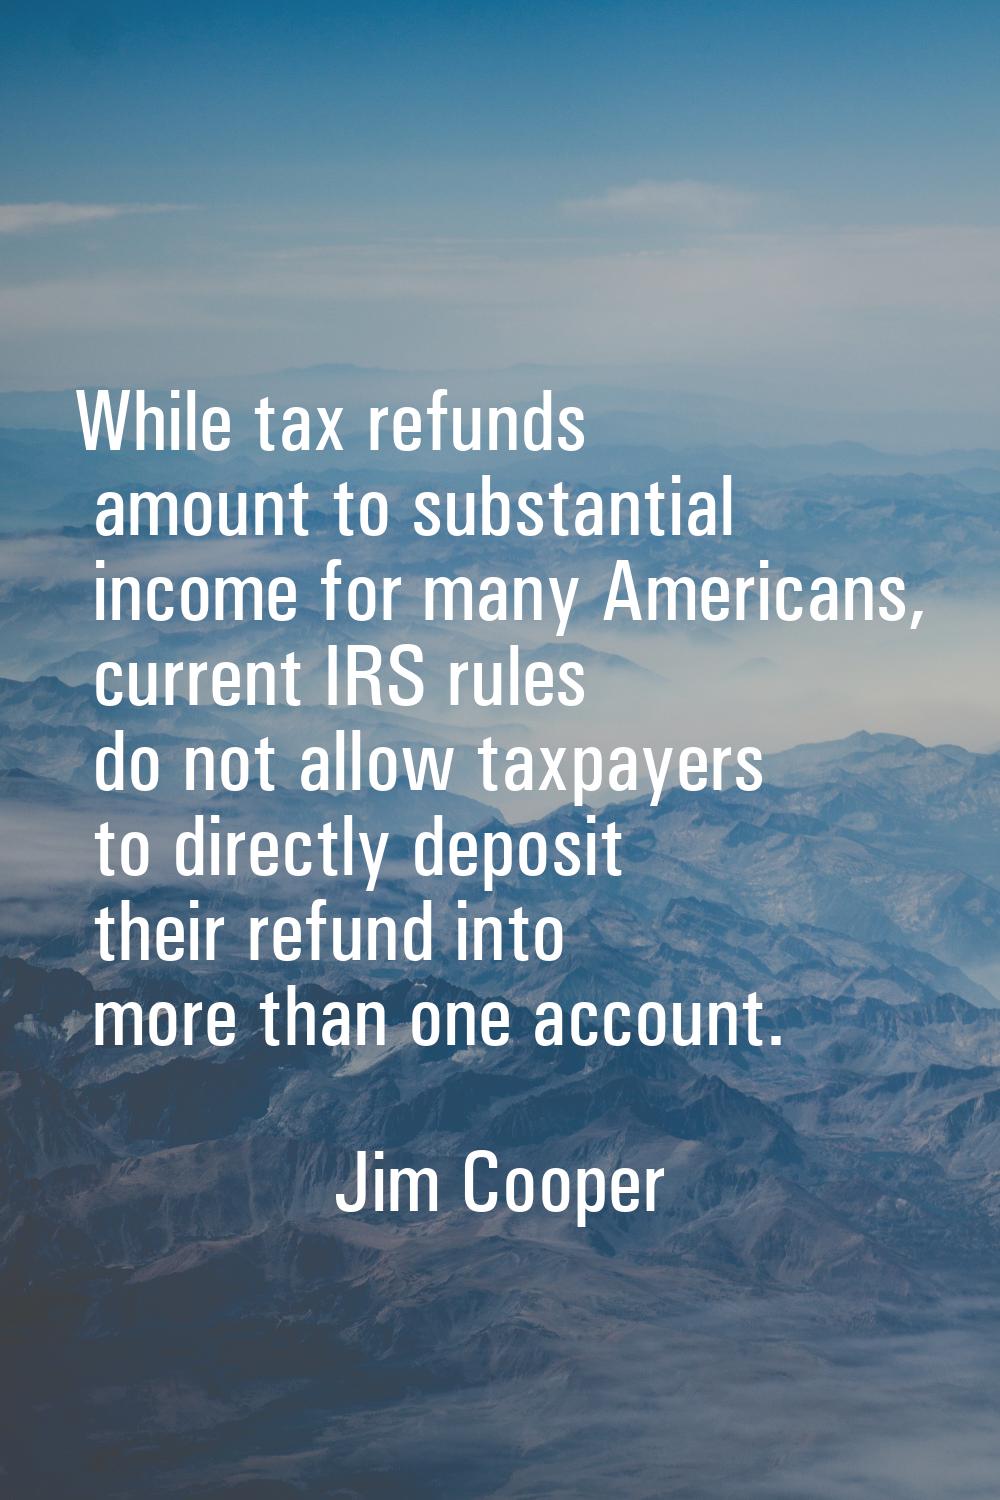 While tax refunds amount to substantial income for many Americans, current IRS rules do not allow t